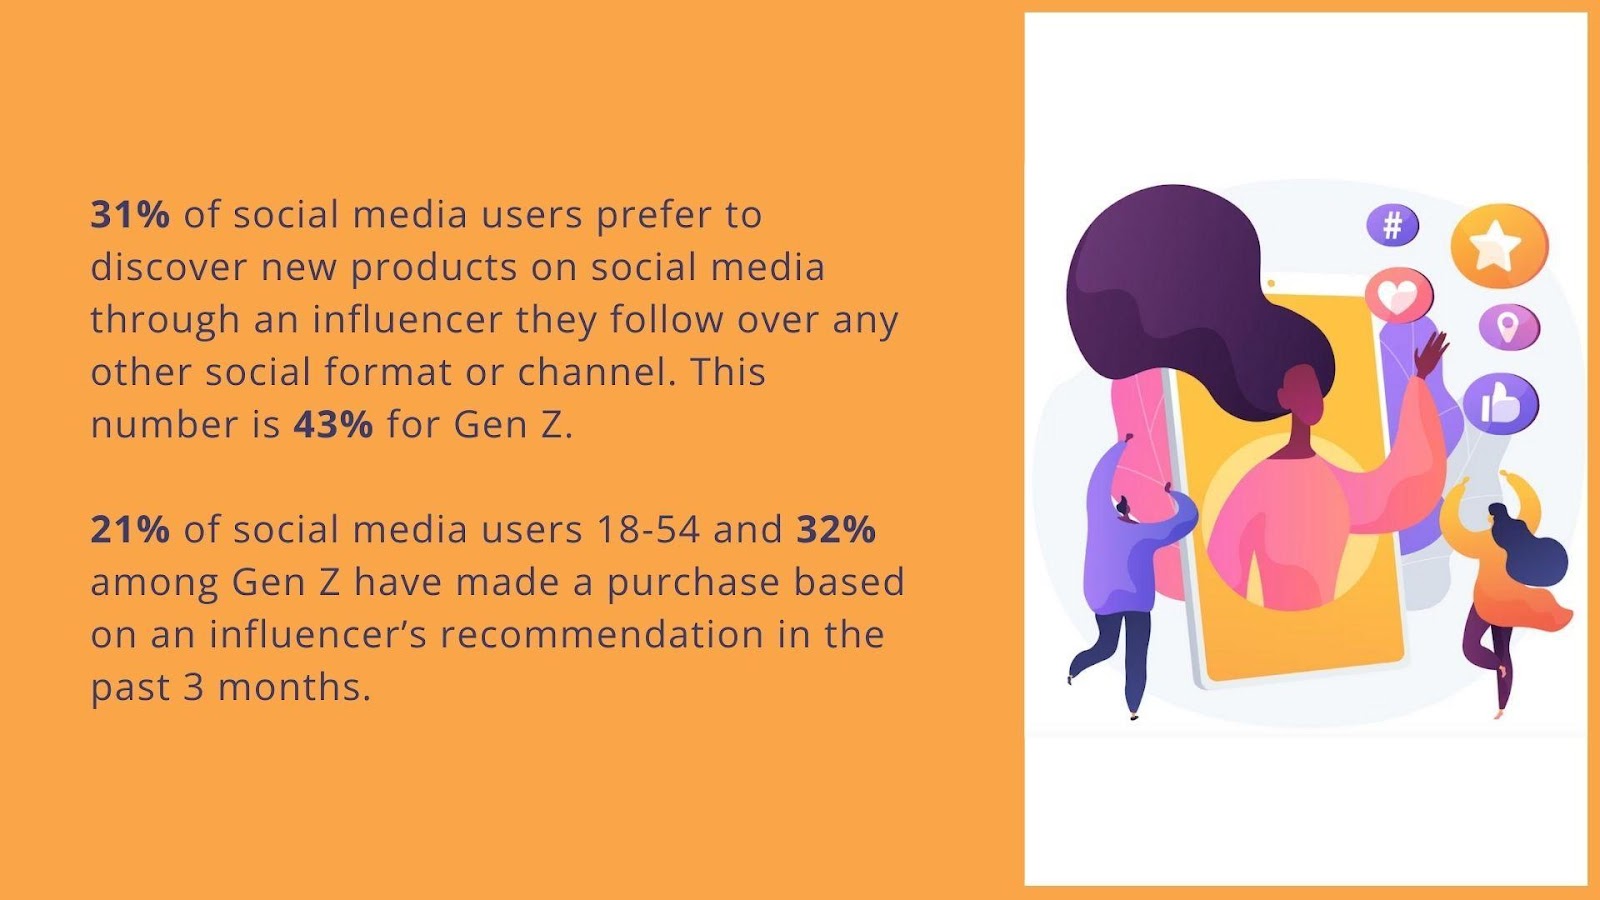 31% of social media users prefer to discover new products on social media through an influencer they follow over any other social format or channel. This number is 43% for Gen Z. 21% of social media users 18-54 and 32% among Gen Z have made a purchase based on an influencer’s recommendation in the past 3 months